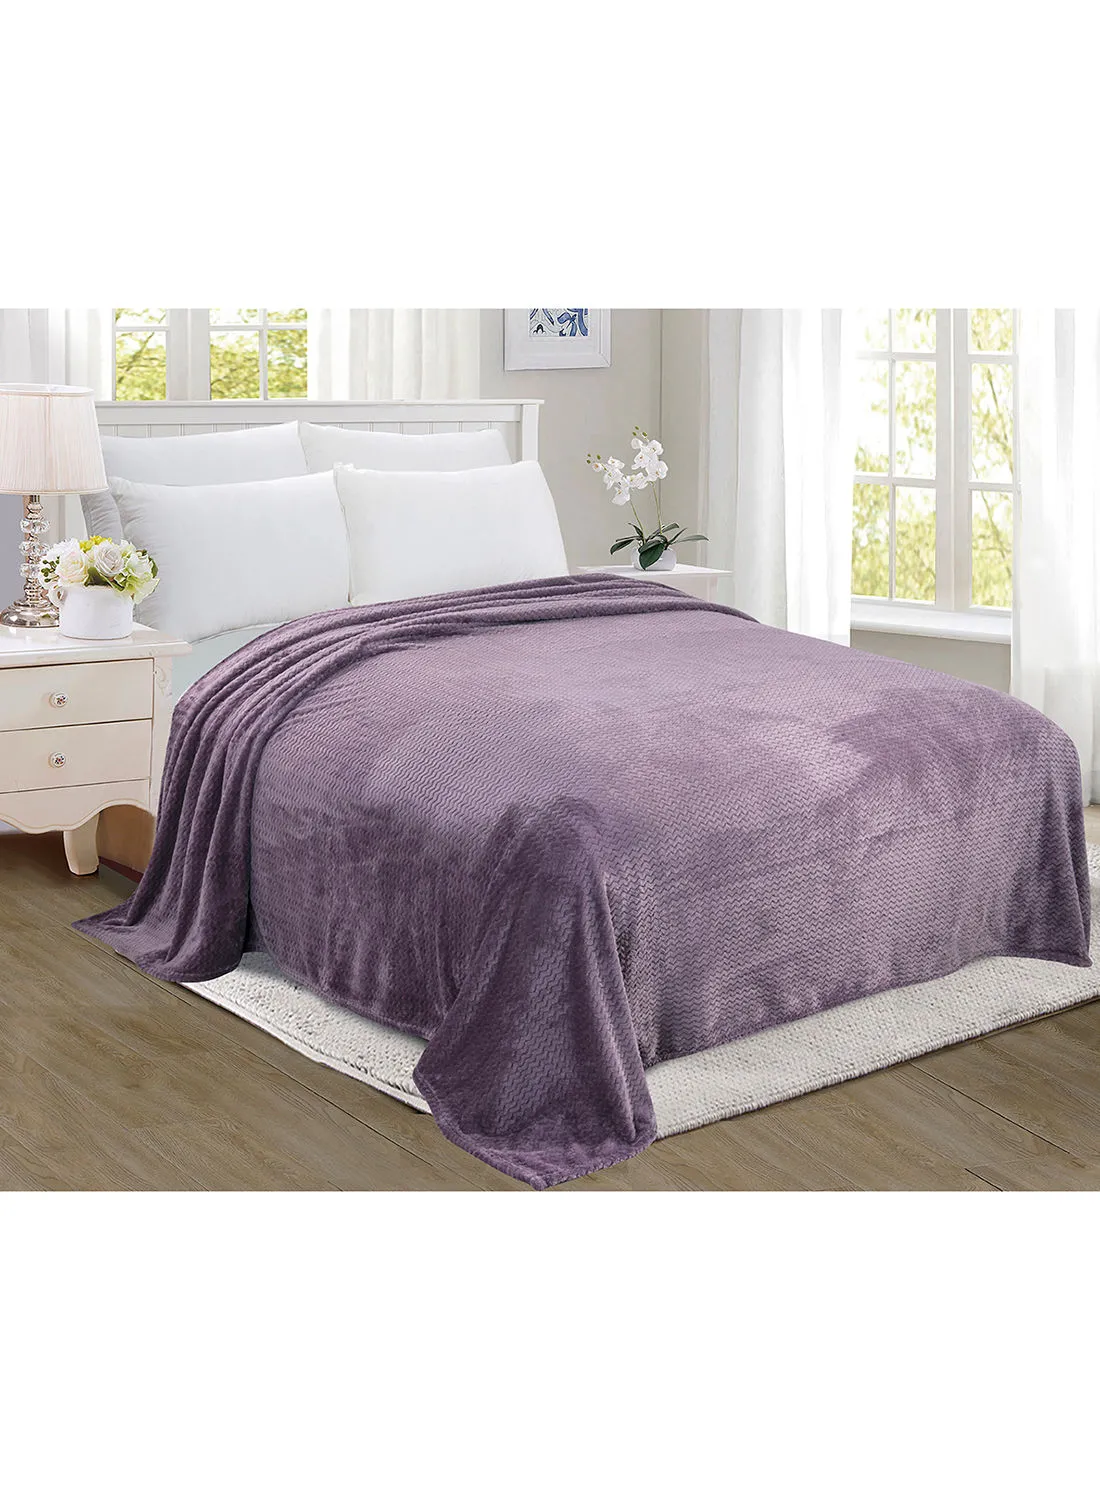 noon east Lightweight Summer Blanket Queen Size 280 GSM Wave Pattern Jaquard Fleece Extra Soft All Season Blanket Bed And Sofa Throw  160 X 220 Cms Purple